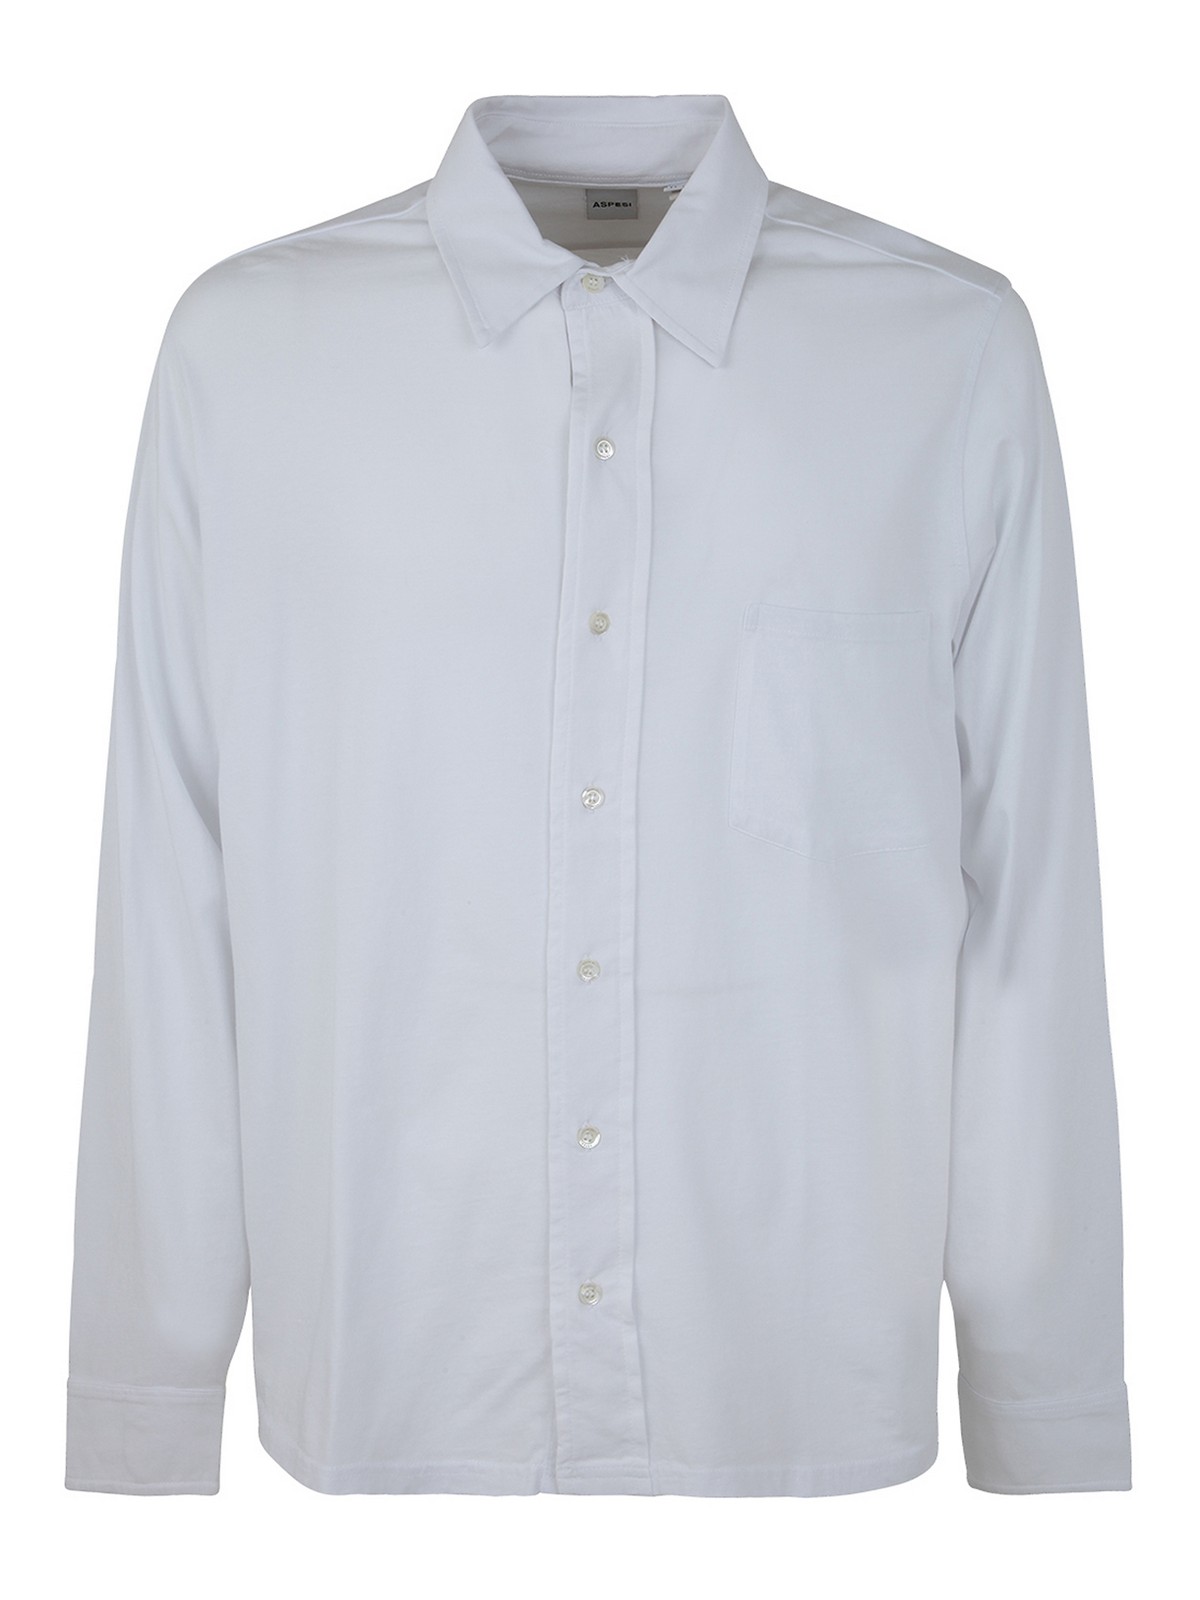 Aspesi Cotton Shirt With Chest Pocket In White